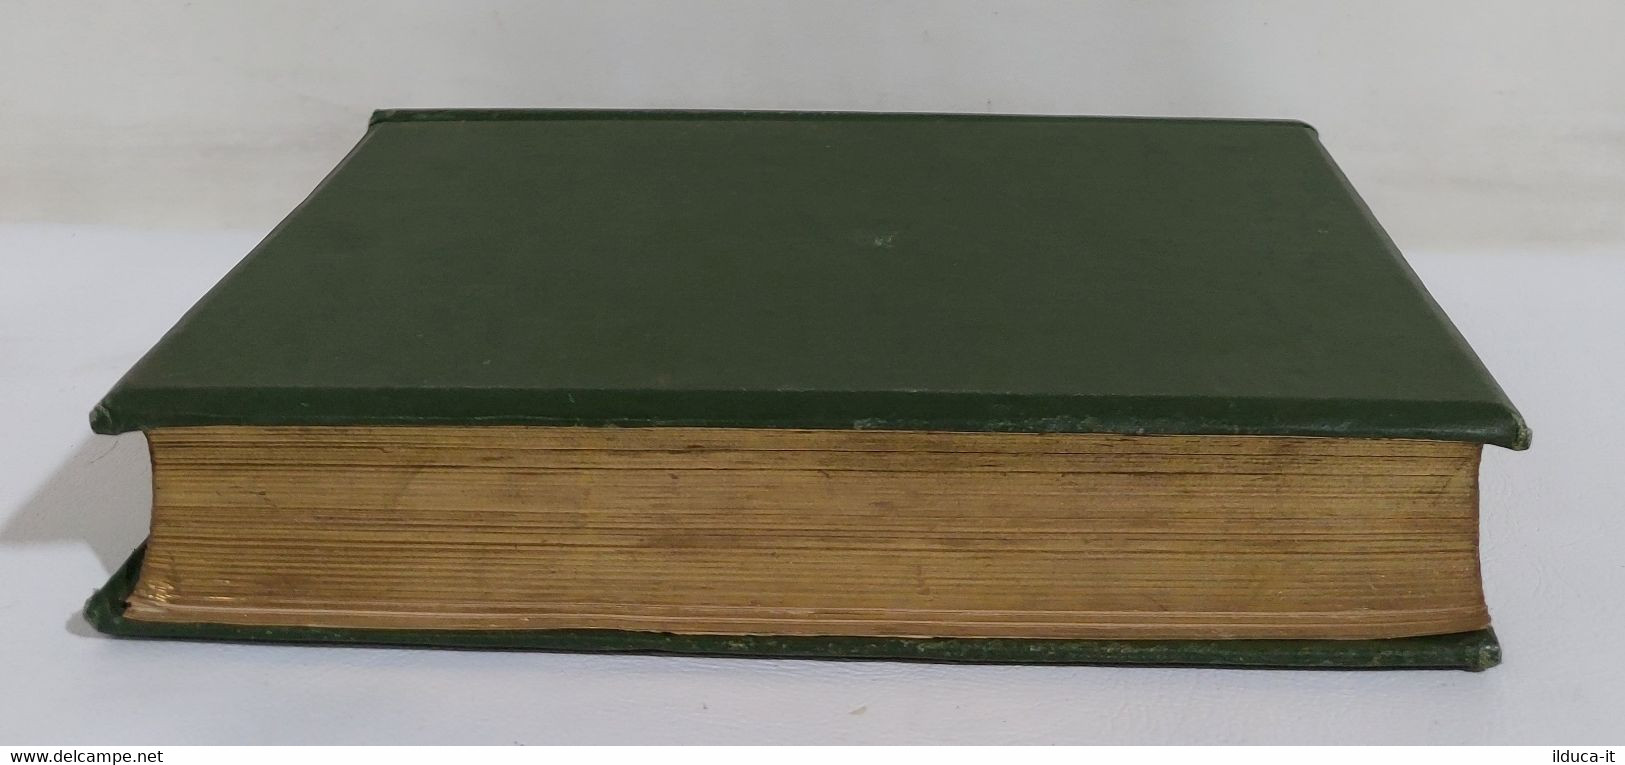 I109084 The Poems Of Elizabeth Barret Browning - W.P. Nimmo, Hay, Mitchell - 1850-1899